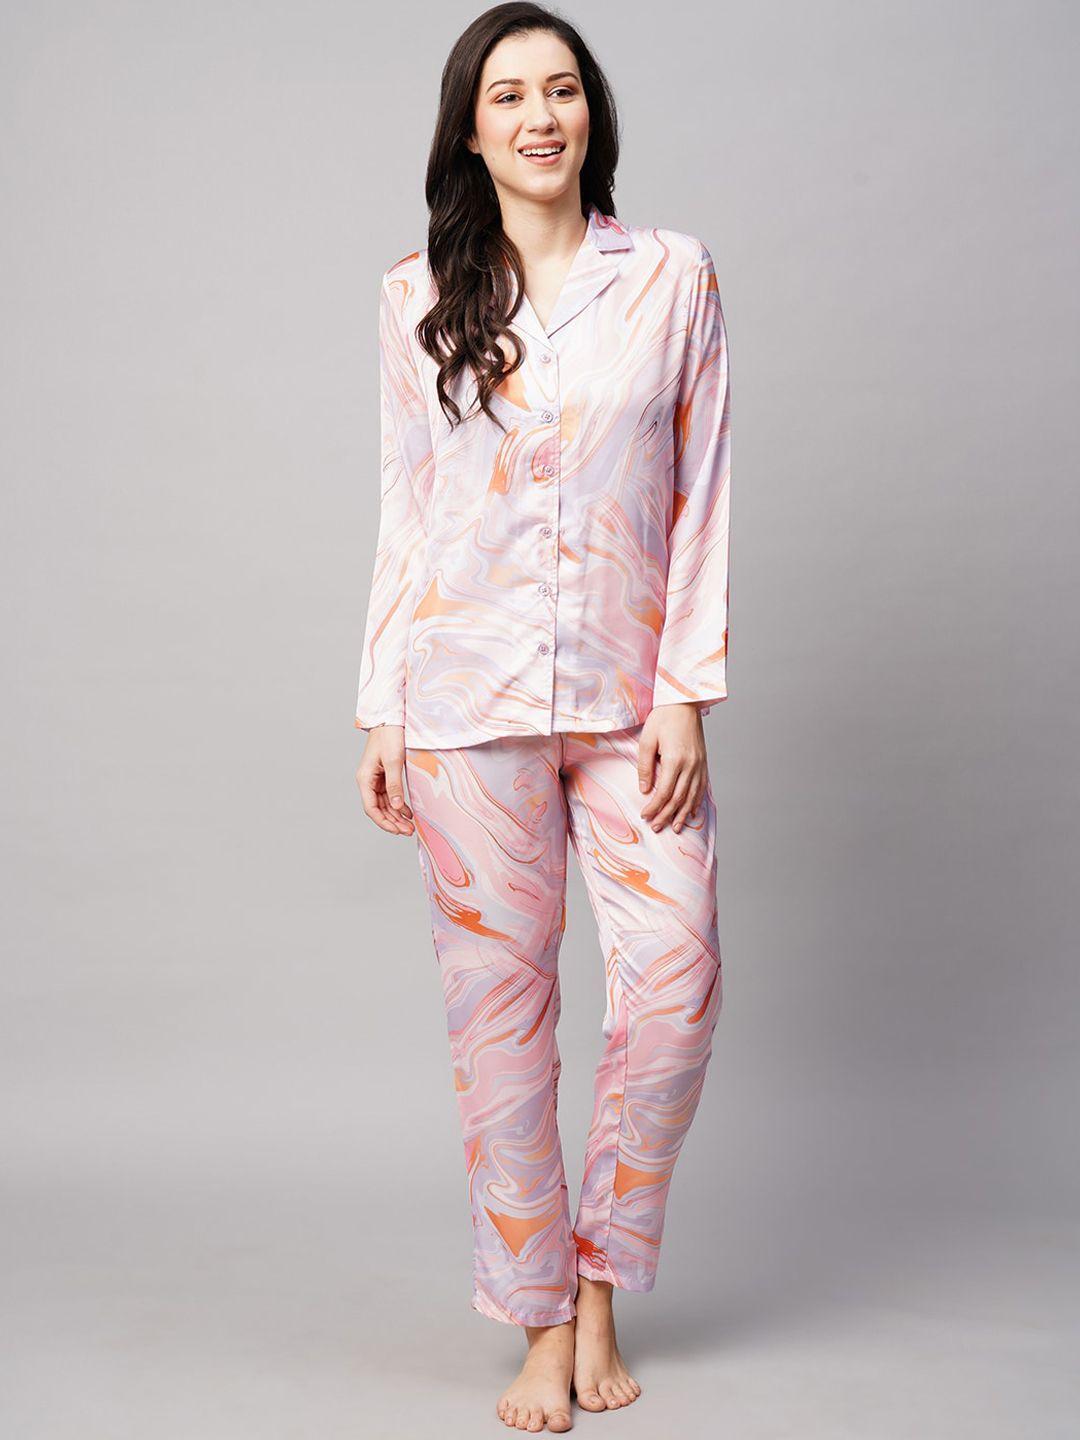 drape in vogue women 2 pieces abstract printed satin night suit